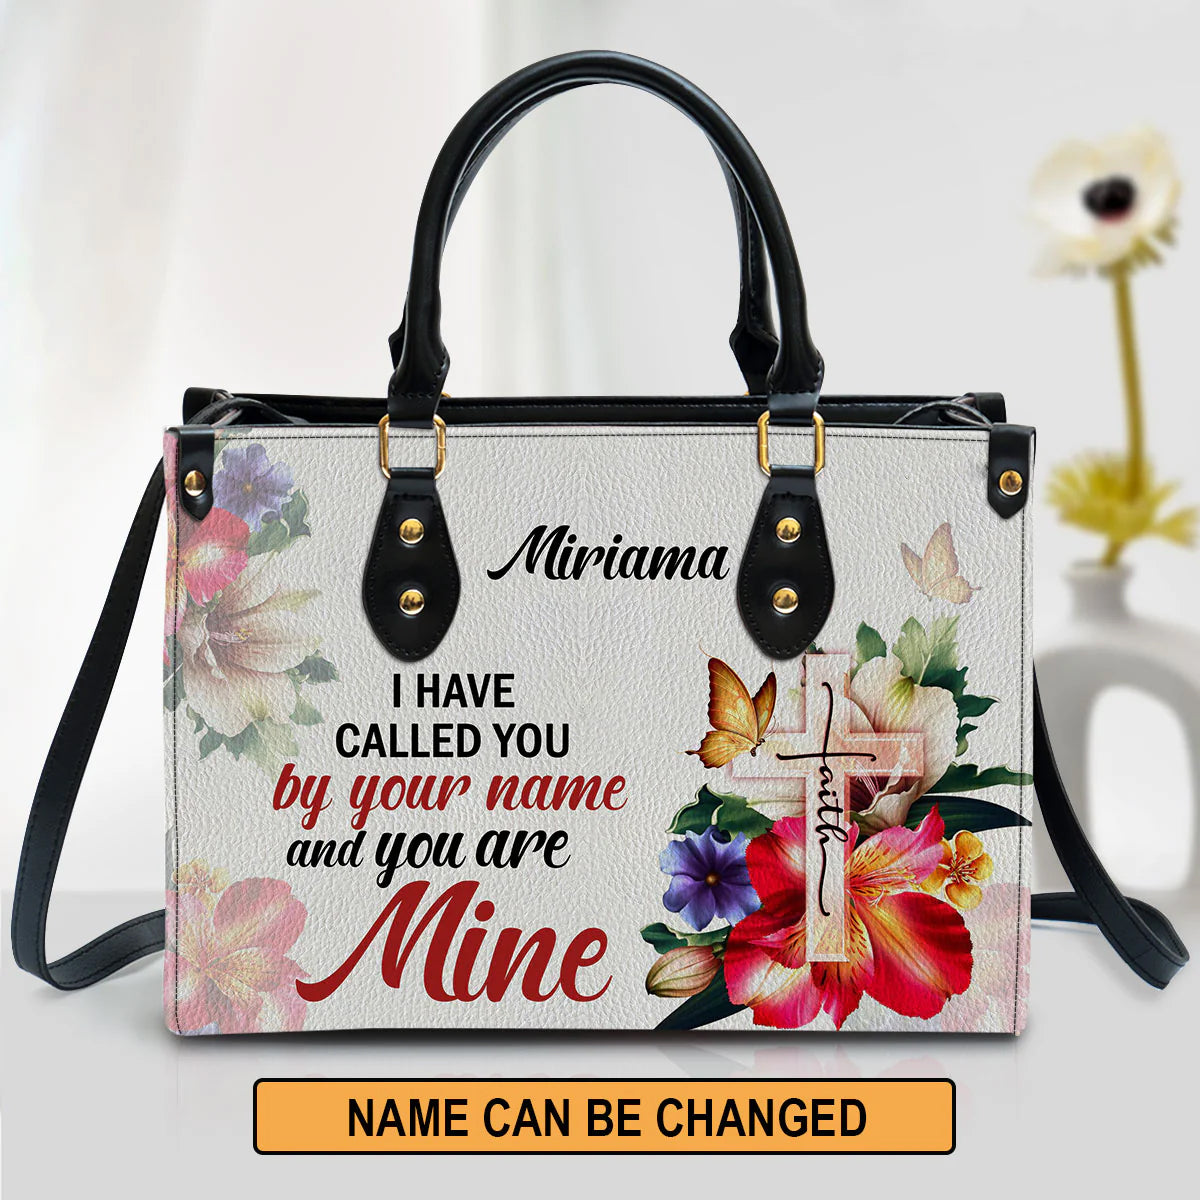 Christianart Handbag, I Have Called You By Your Name Isaiah 43:1, Personalized Gifts, Gifts for Women. - Christian Art Bag